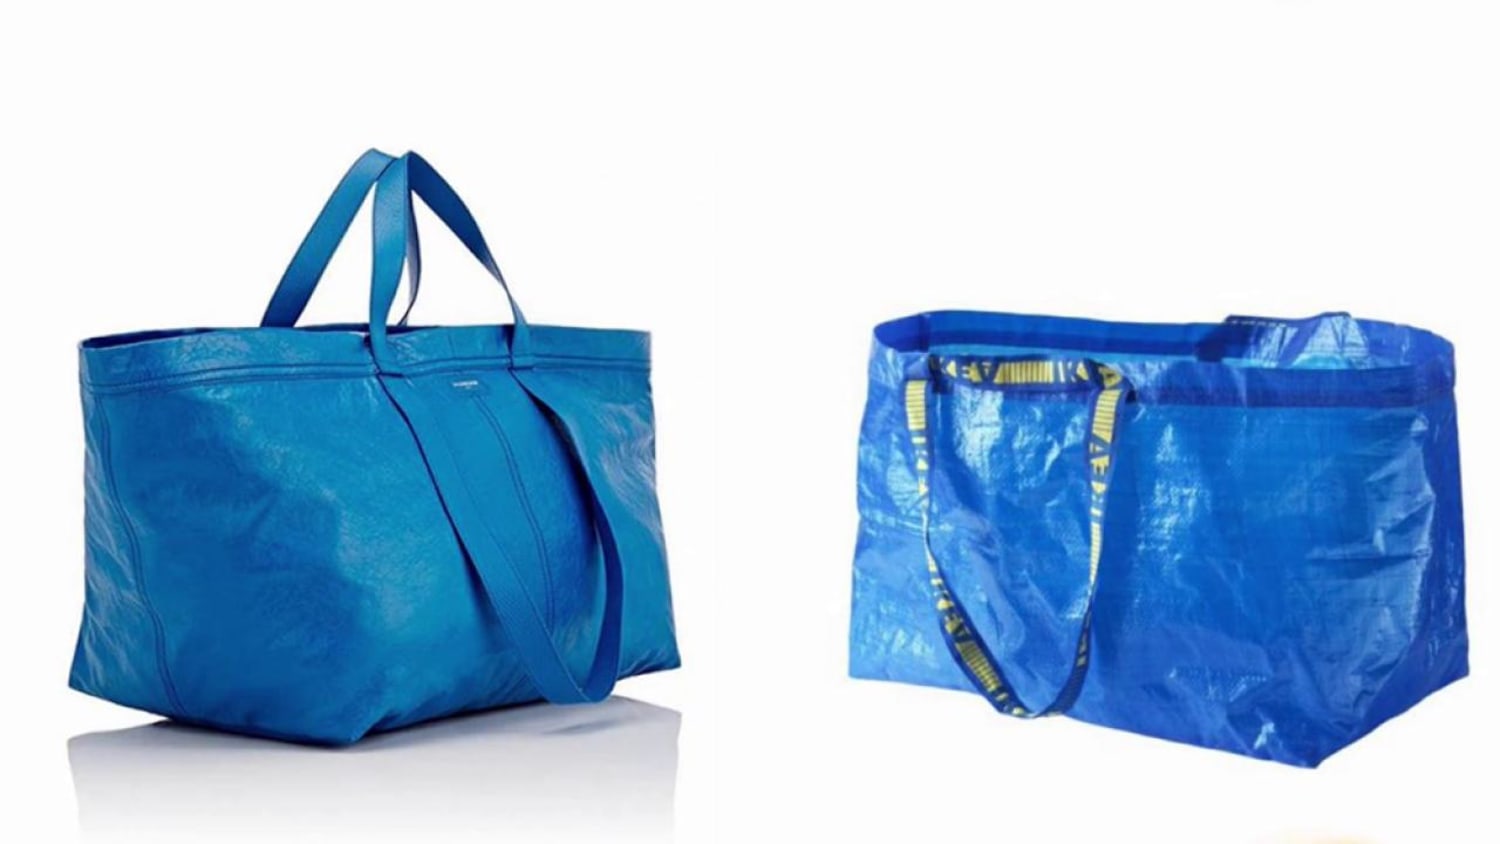 Balenciaga reveals a bag that looks like a Lay's chips packet